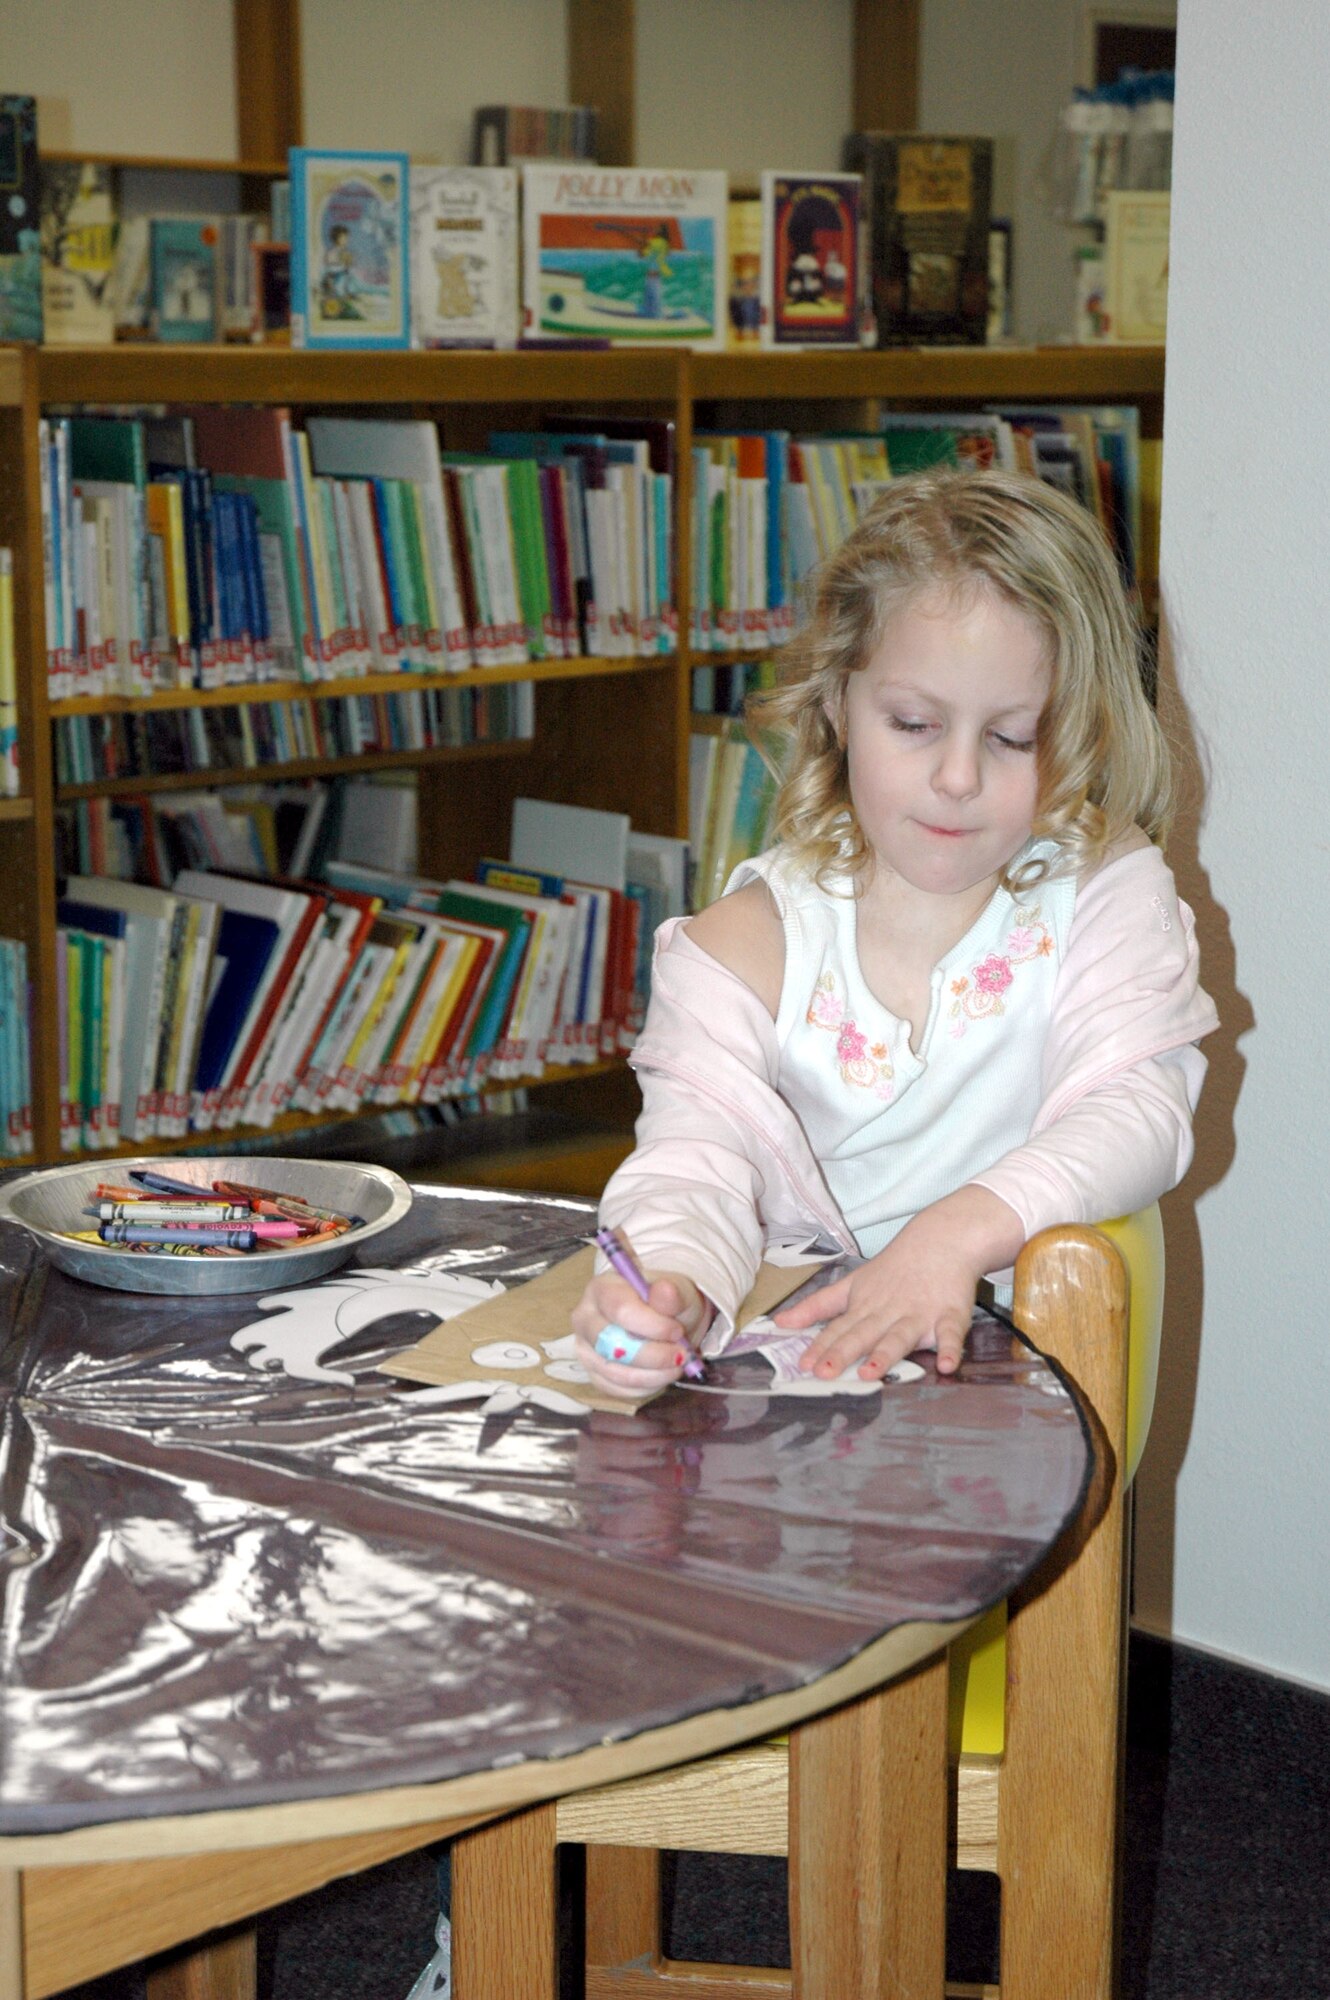 Little Warrior Lauren, 4, colors her owl-themed craft project Jan. 22 at the Arden G. Hill Memorial Library. Each Tuesday at 10 a.m., the library holds storytime and the children create craft projects that coincide with the day’s reading theme. Check out other library events at www.341services.com/library. (U.S. Air Force photo/Senior Airman Eydie Sakura)